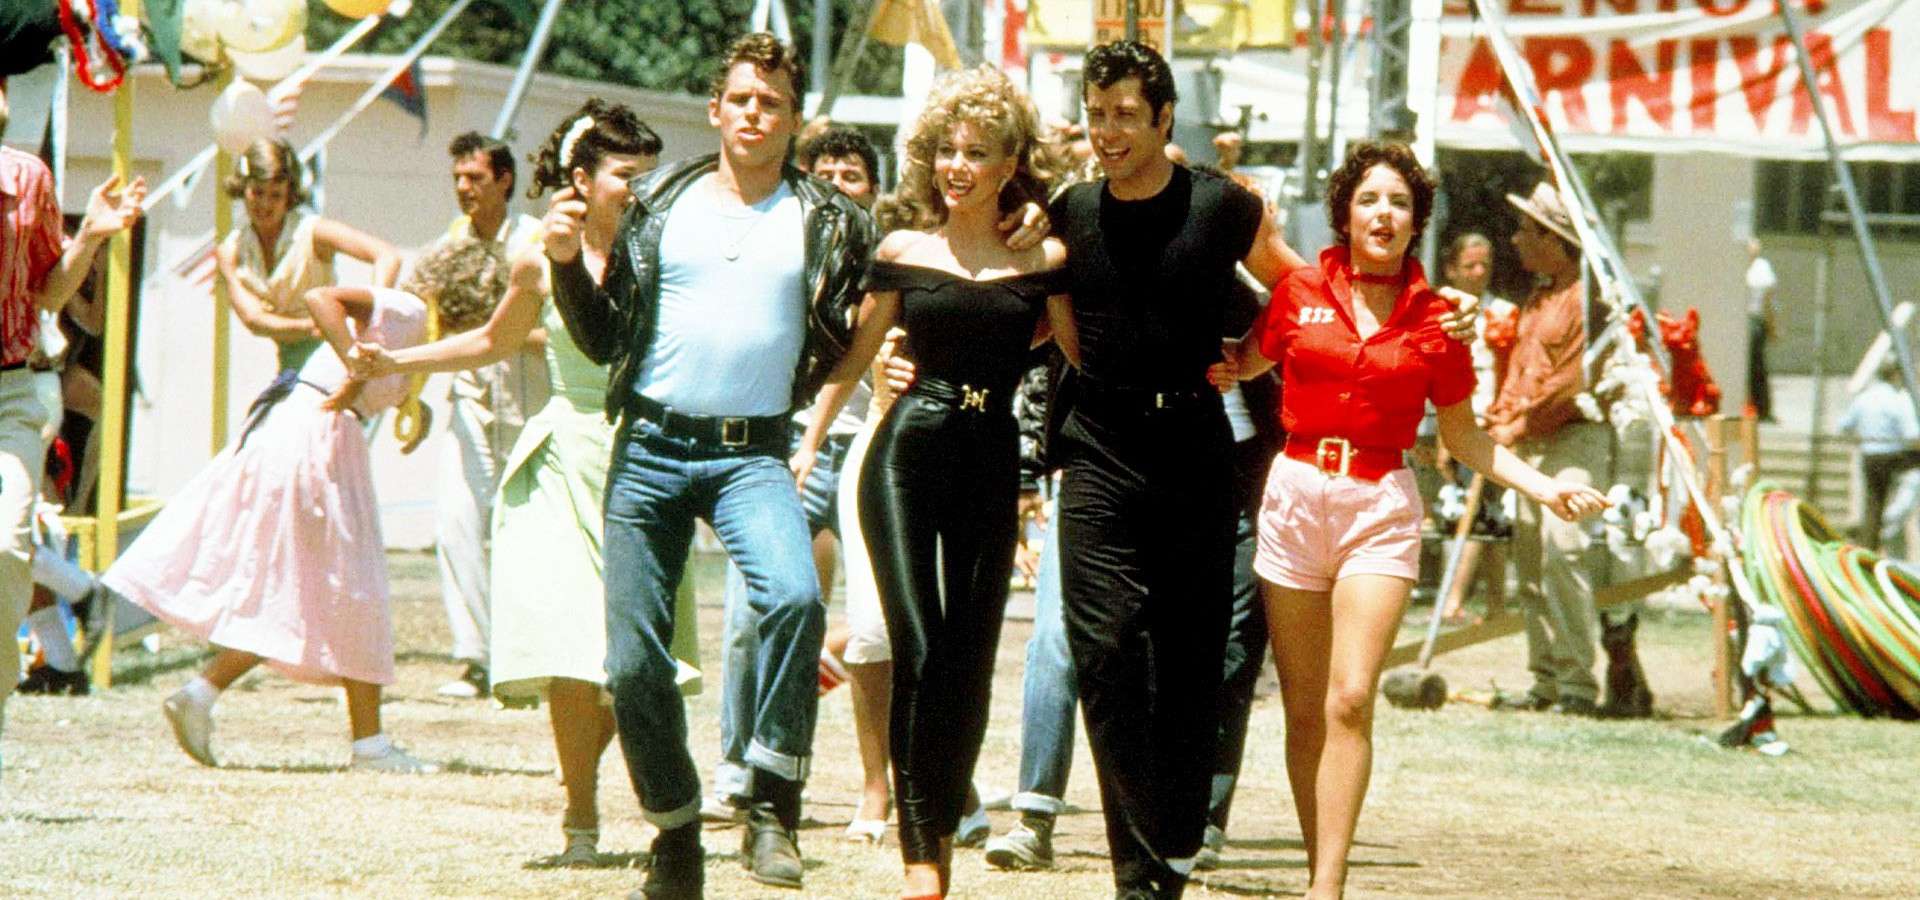 45 thoughts we had while watching Grease